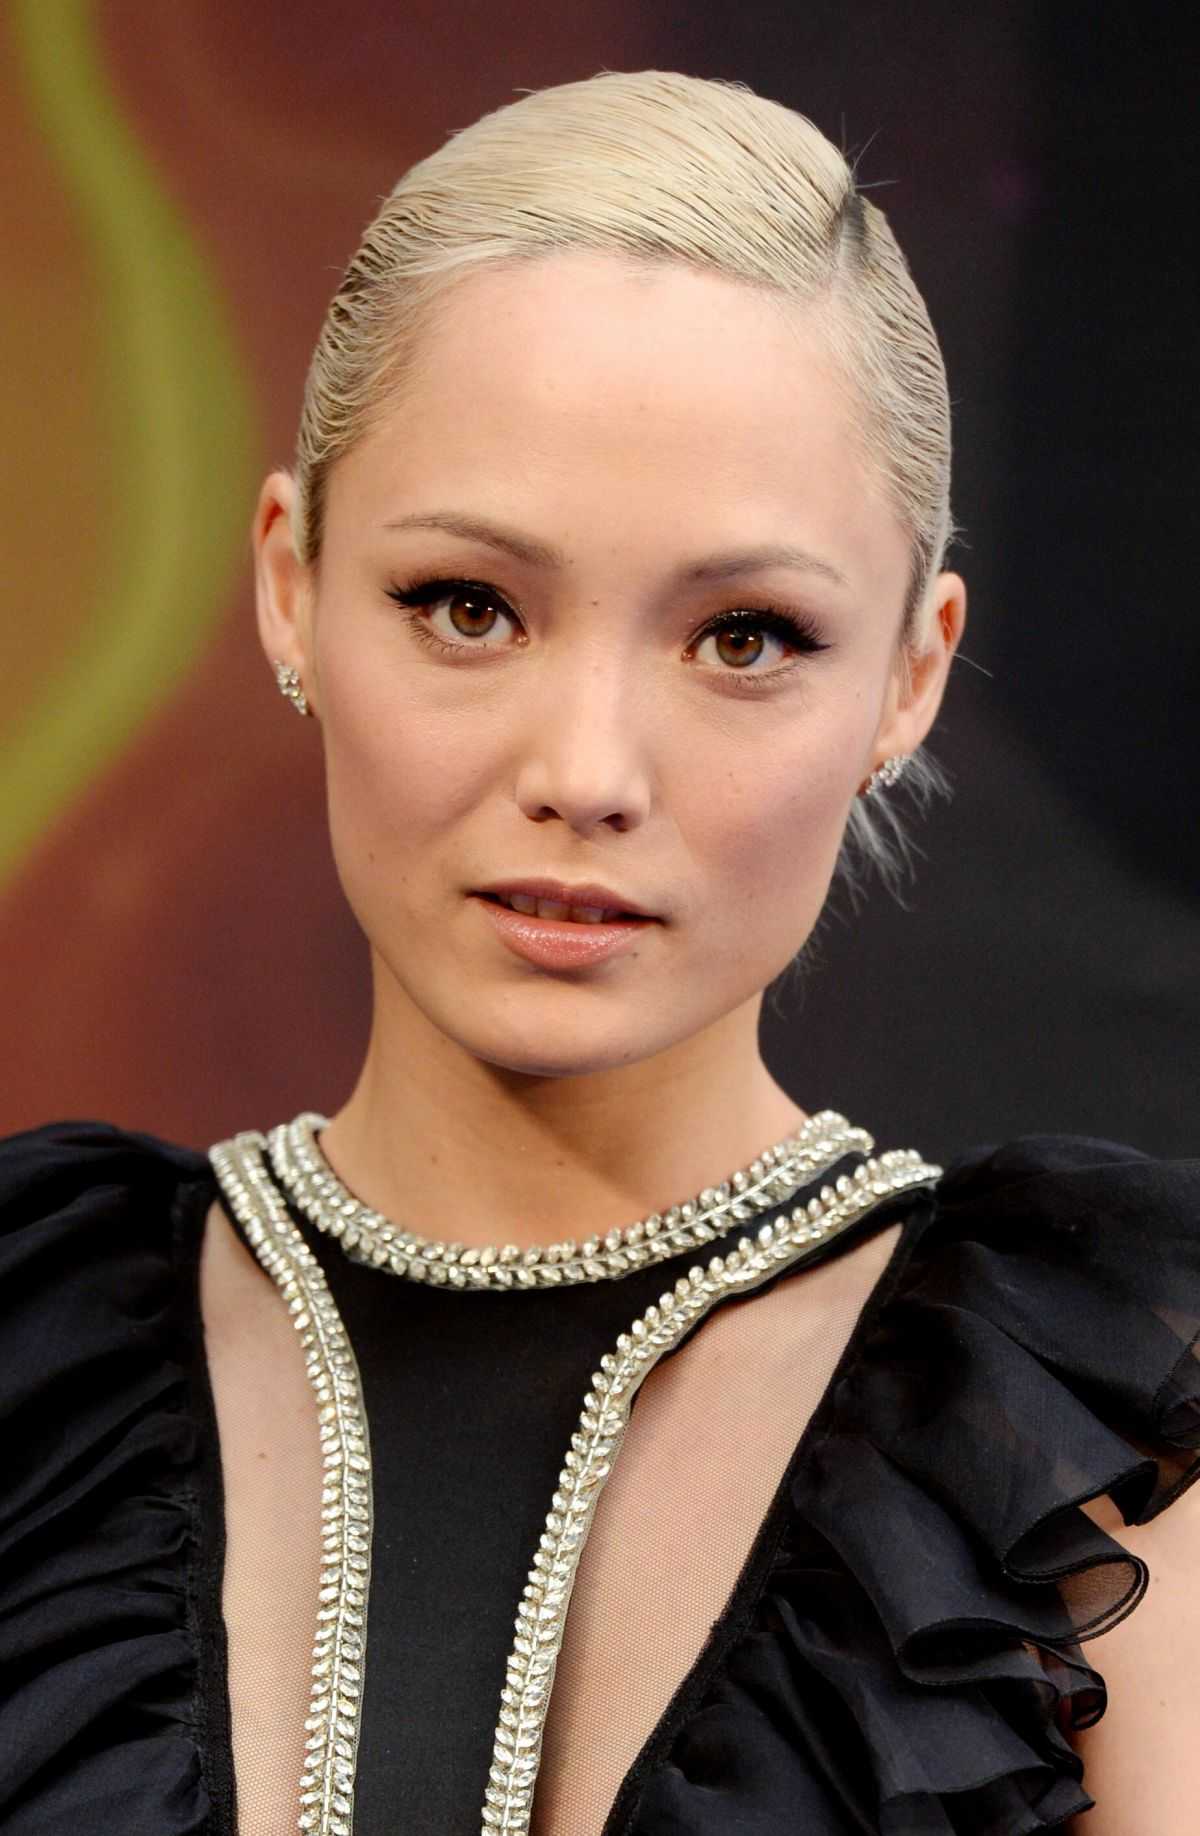 70+ Hot Pictures Of Pom Klementieff Who Plays Mantis In Marvel Cinematic Universe 151